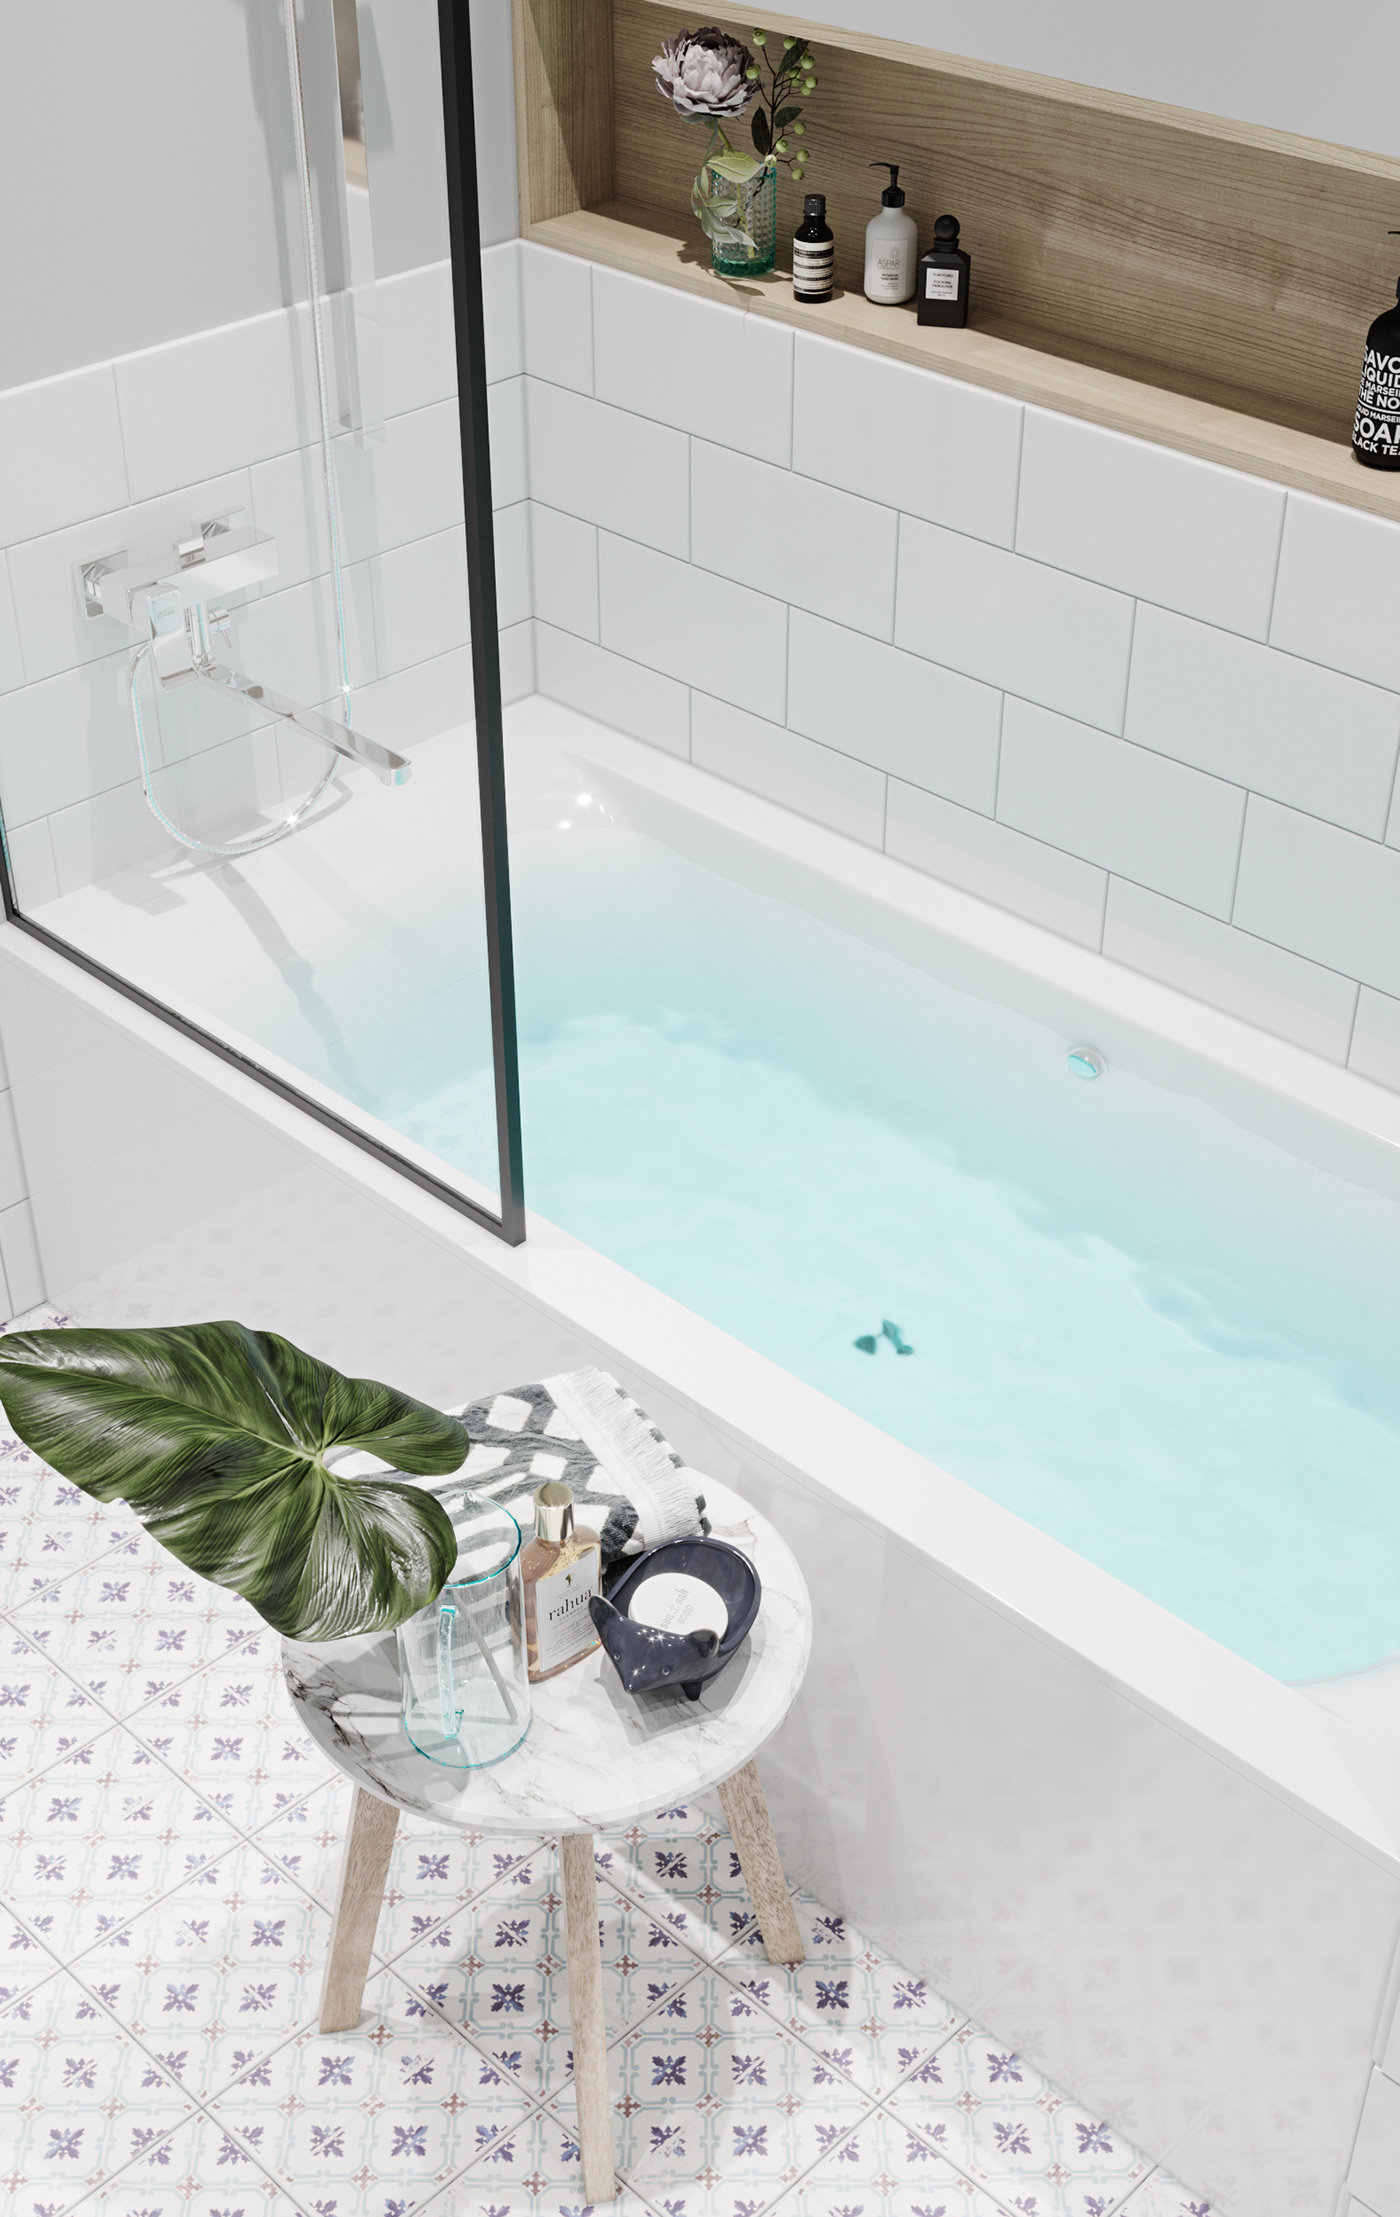 Scented candles and small items in the bathroom, helping homeowners relax while soaking in the tub after stressful working hours.